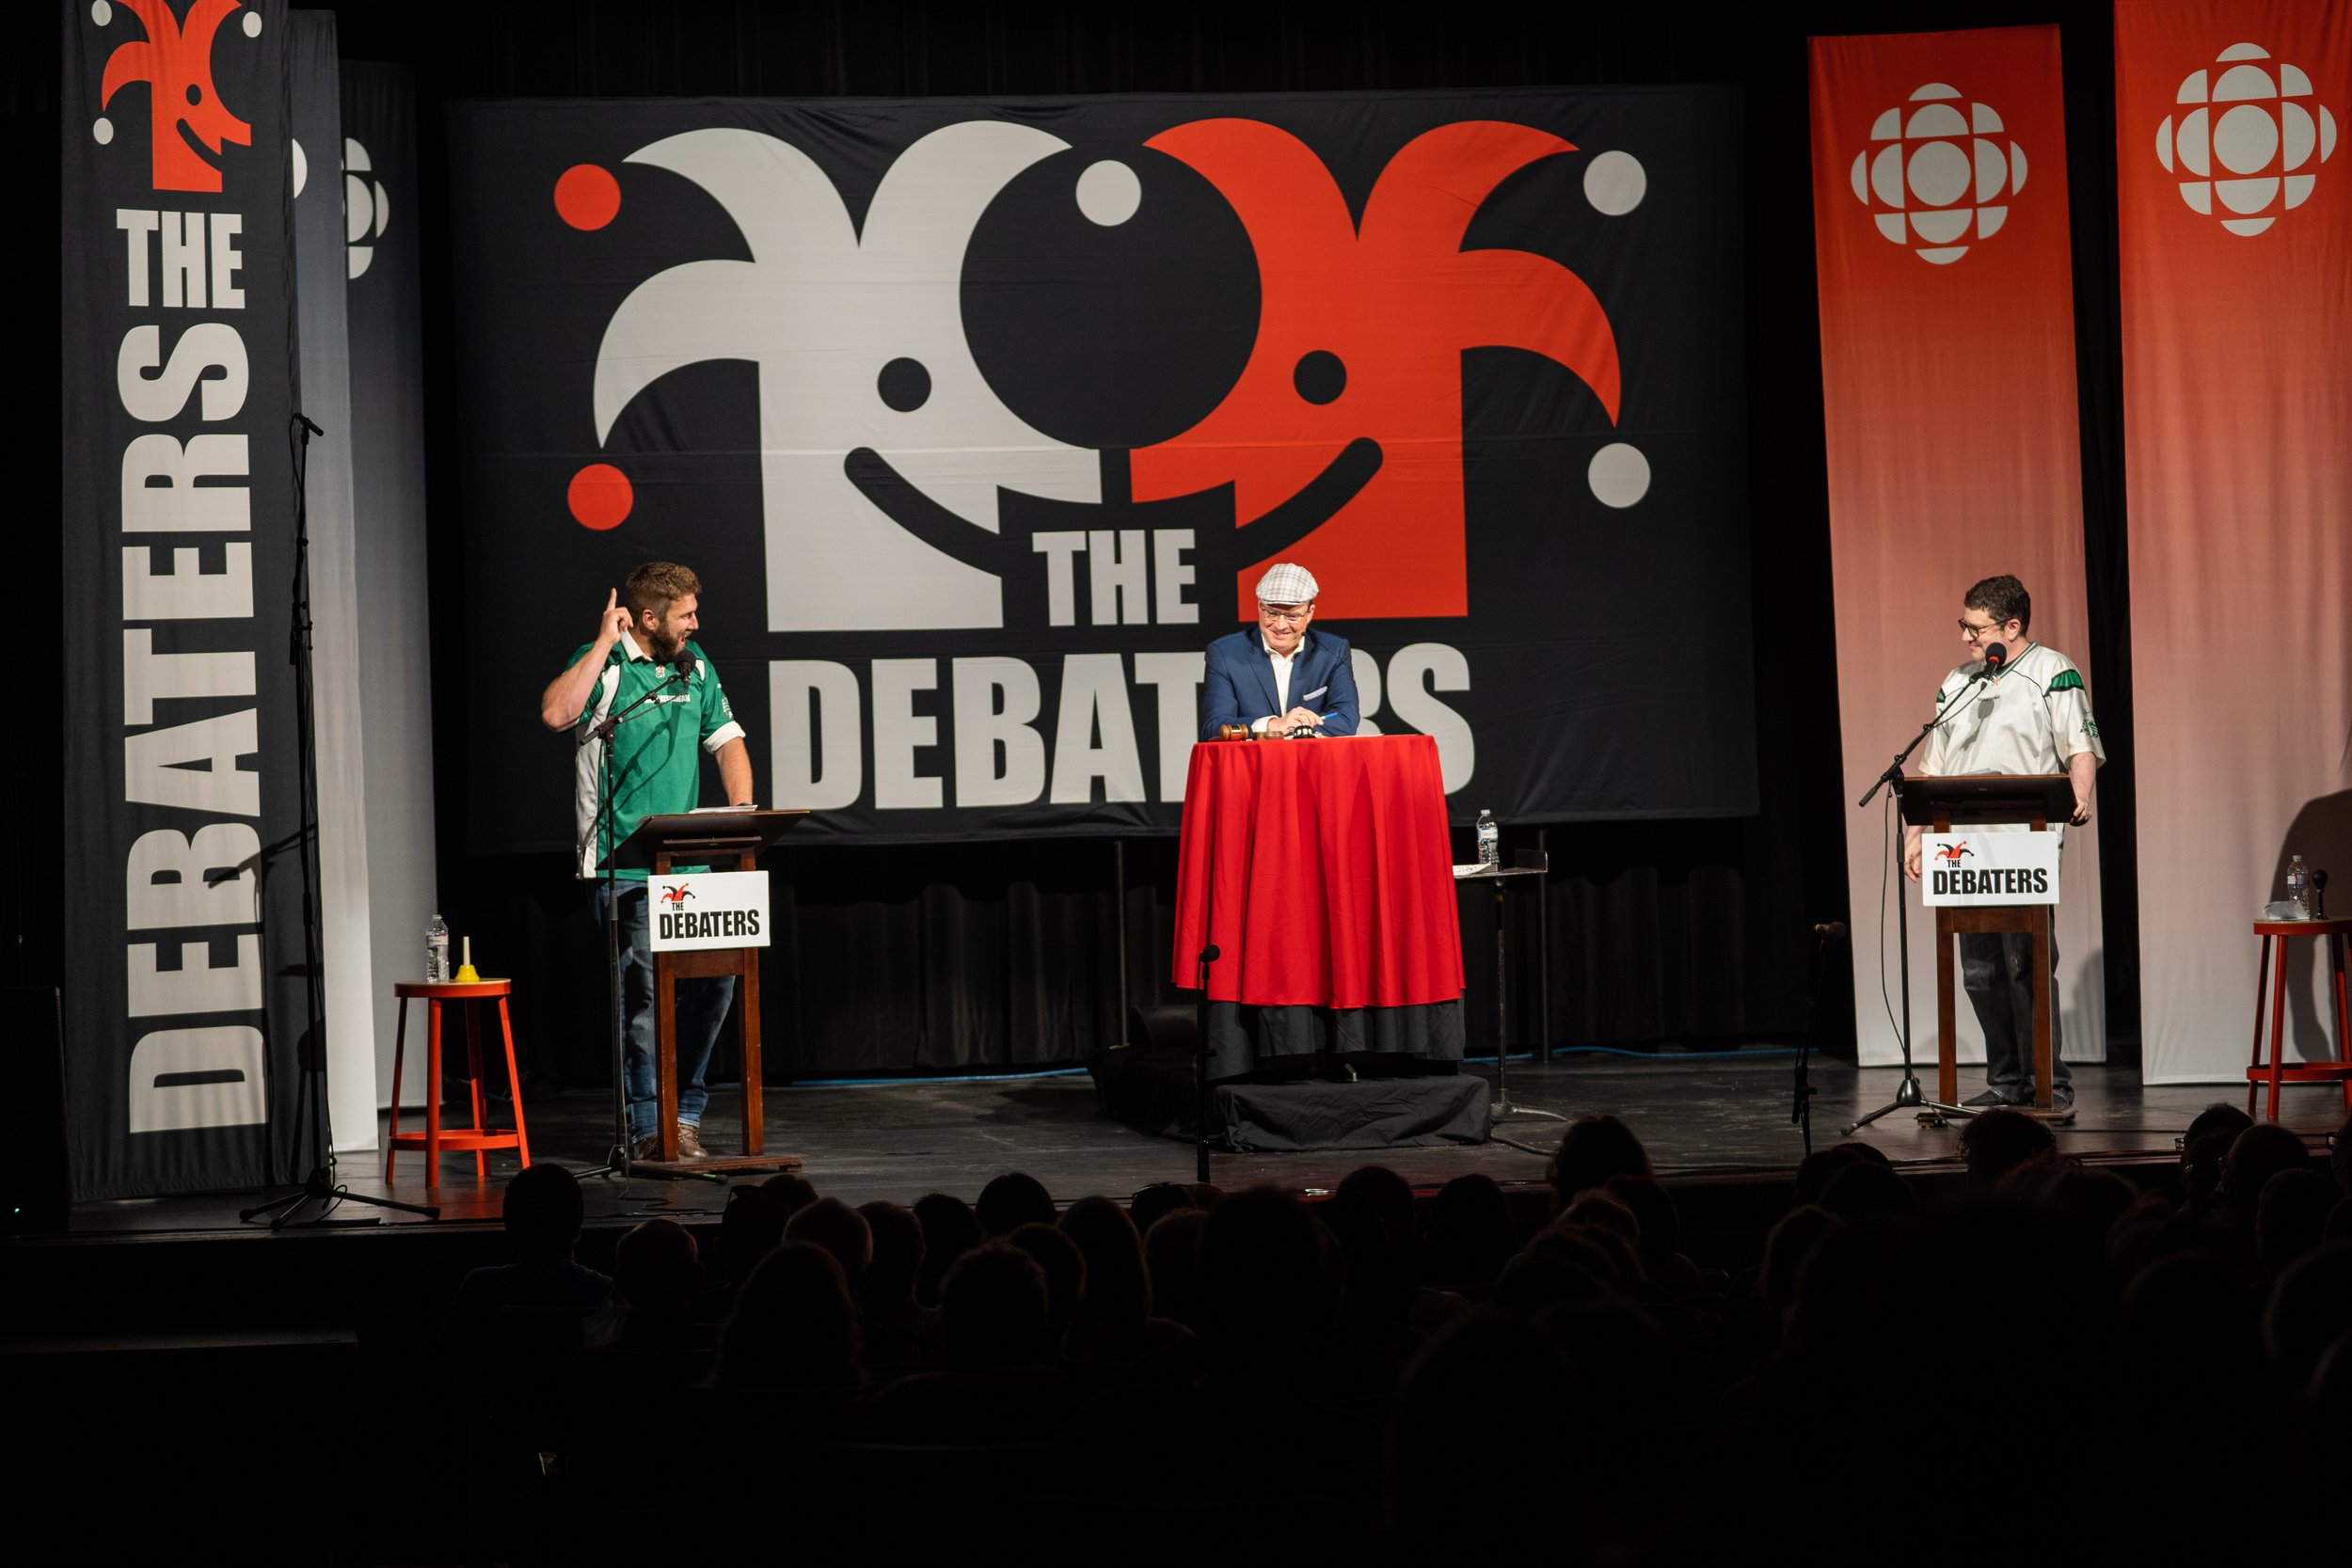 CBC's The Debaters taping - me, Steve Patterson, Peter Brown